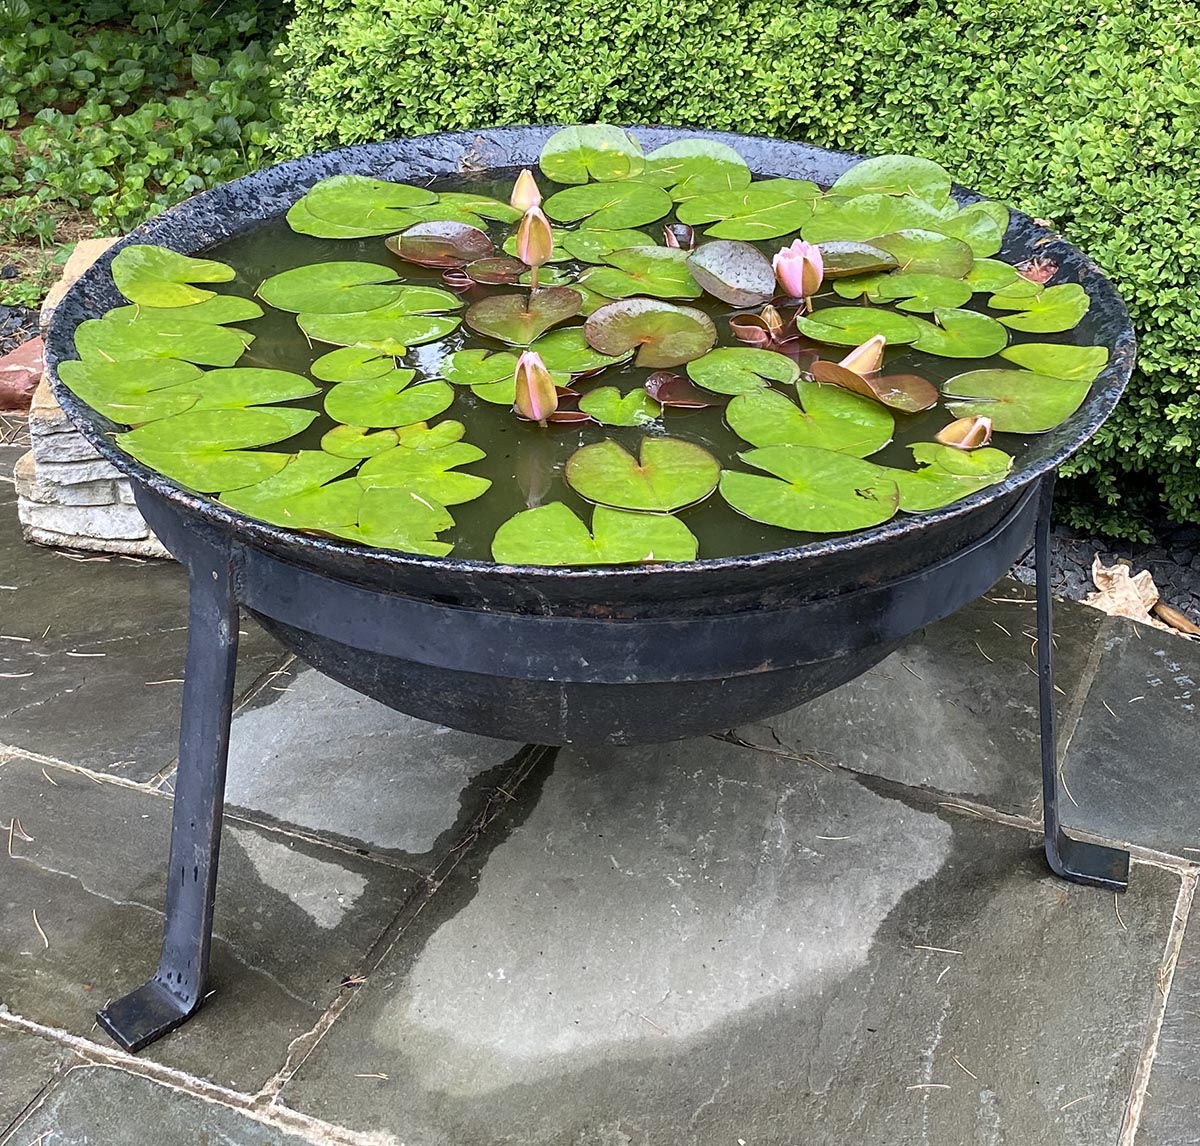 Photo of water lilies growing in an antique sugar kettle.